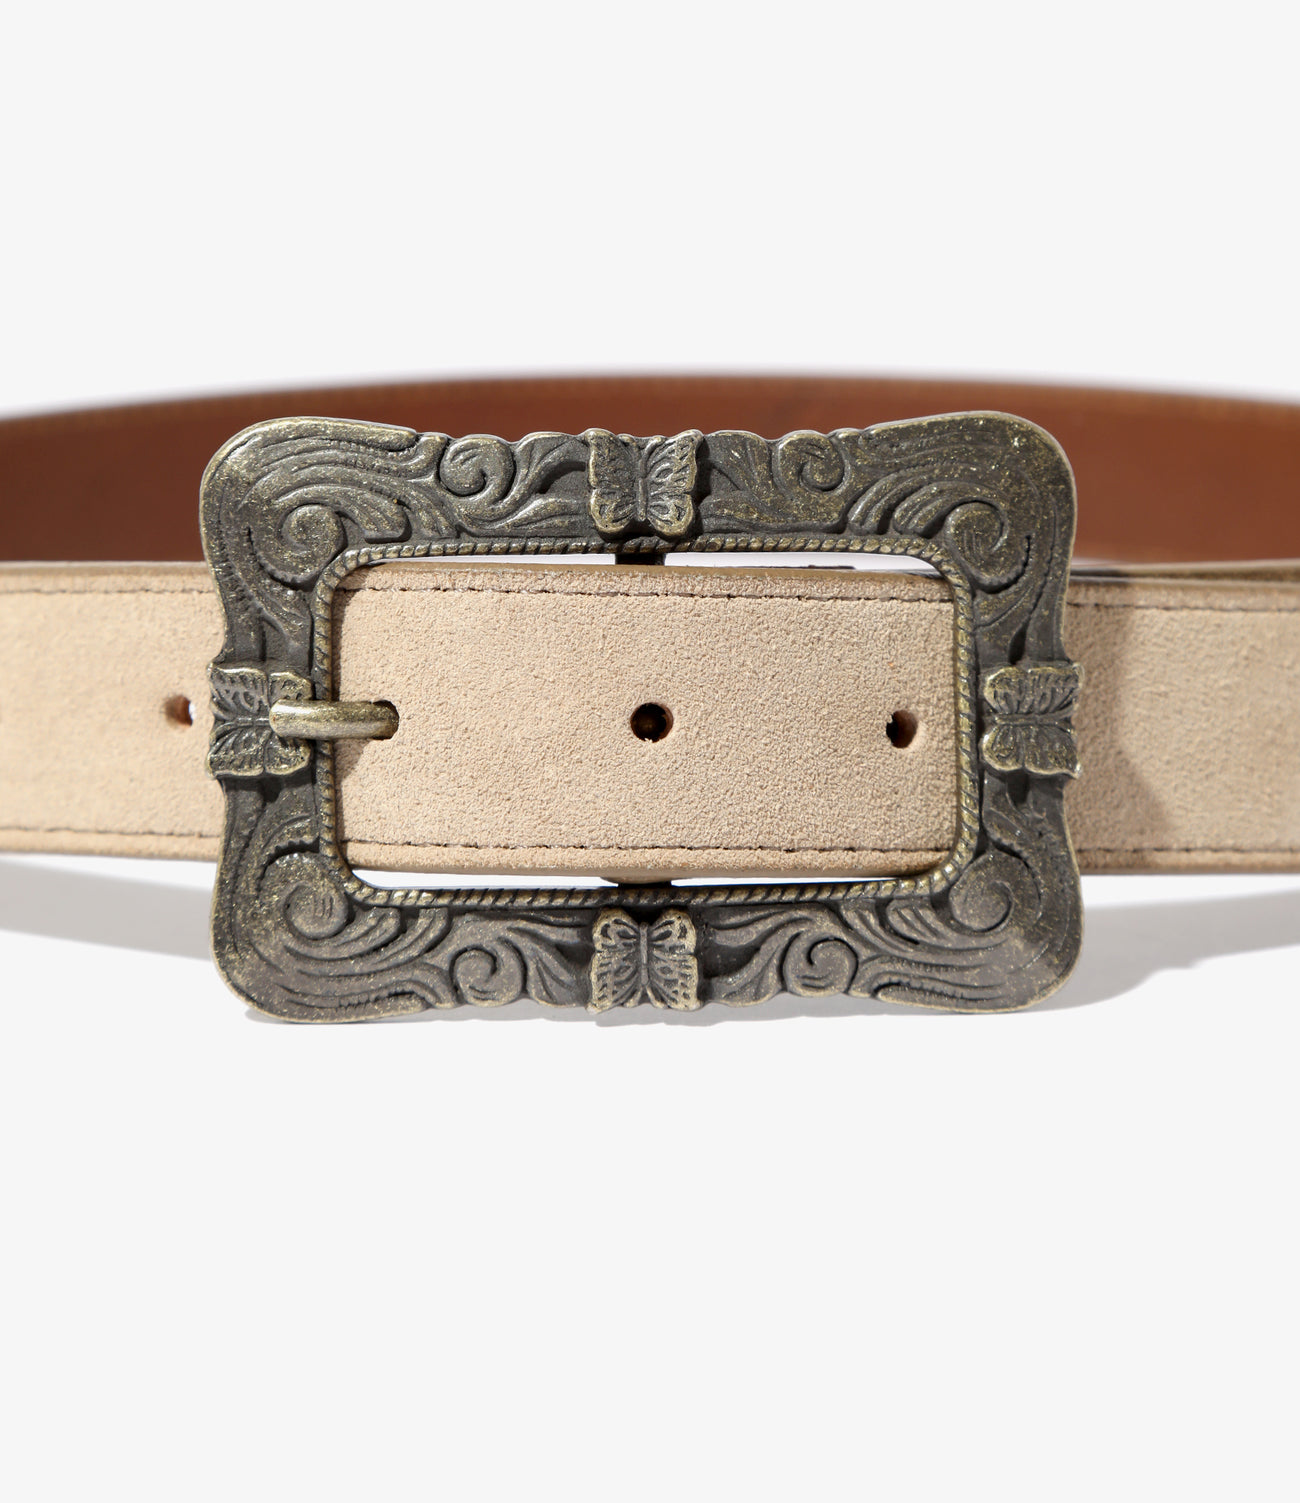 Needles Papillon Square Buckle Belt - Crocodile Embossed Leather –  unexpected store